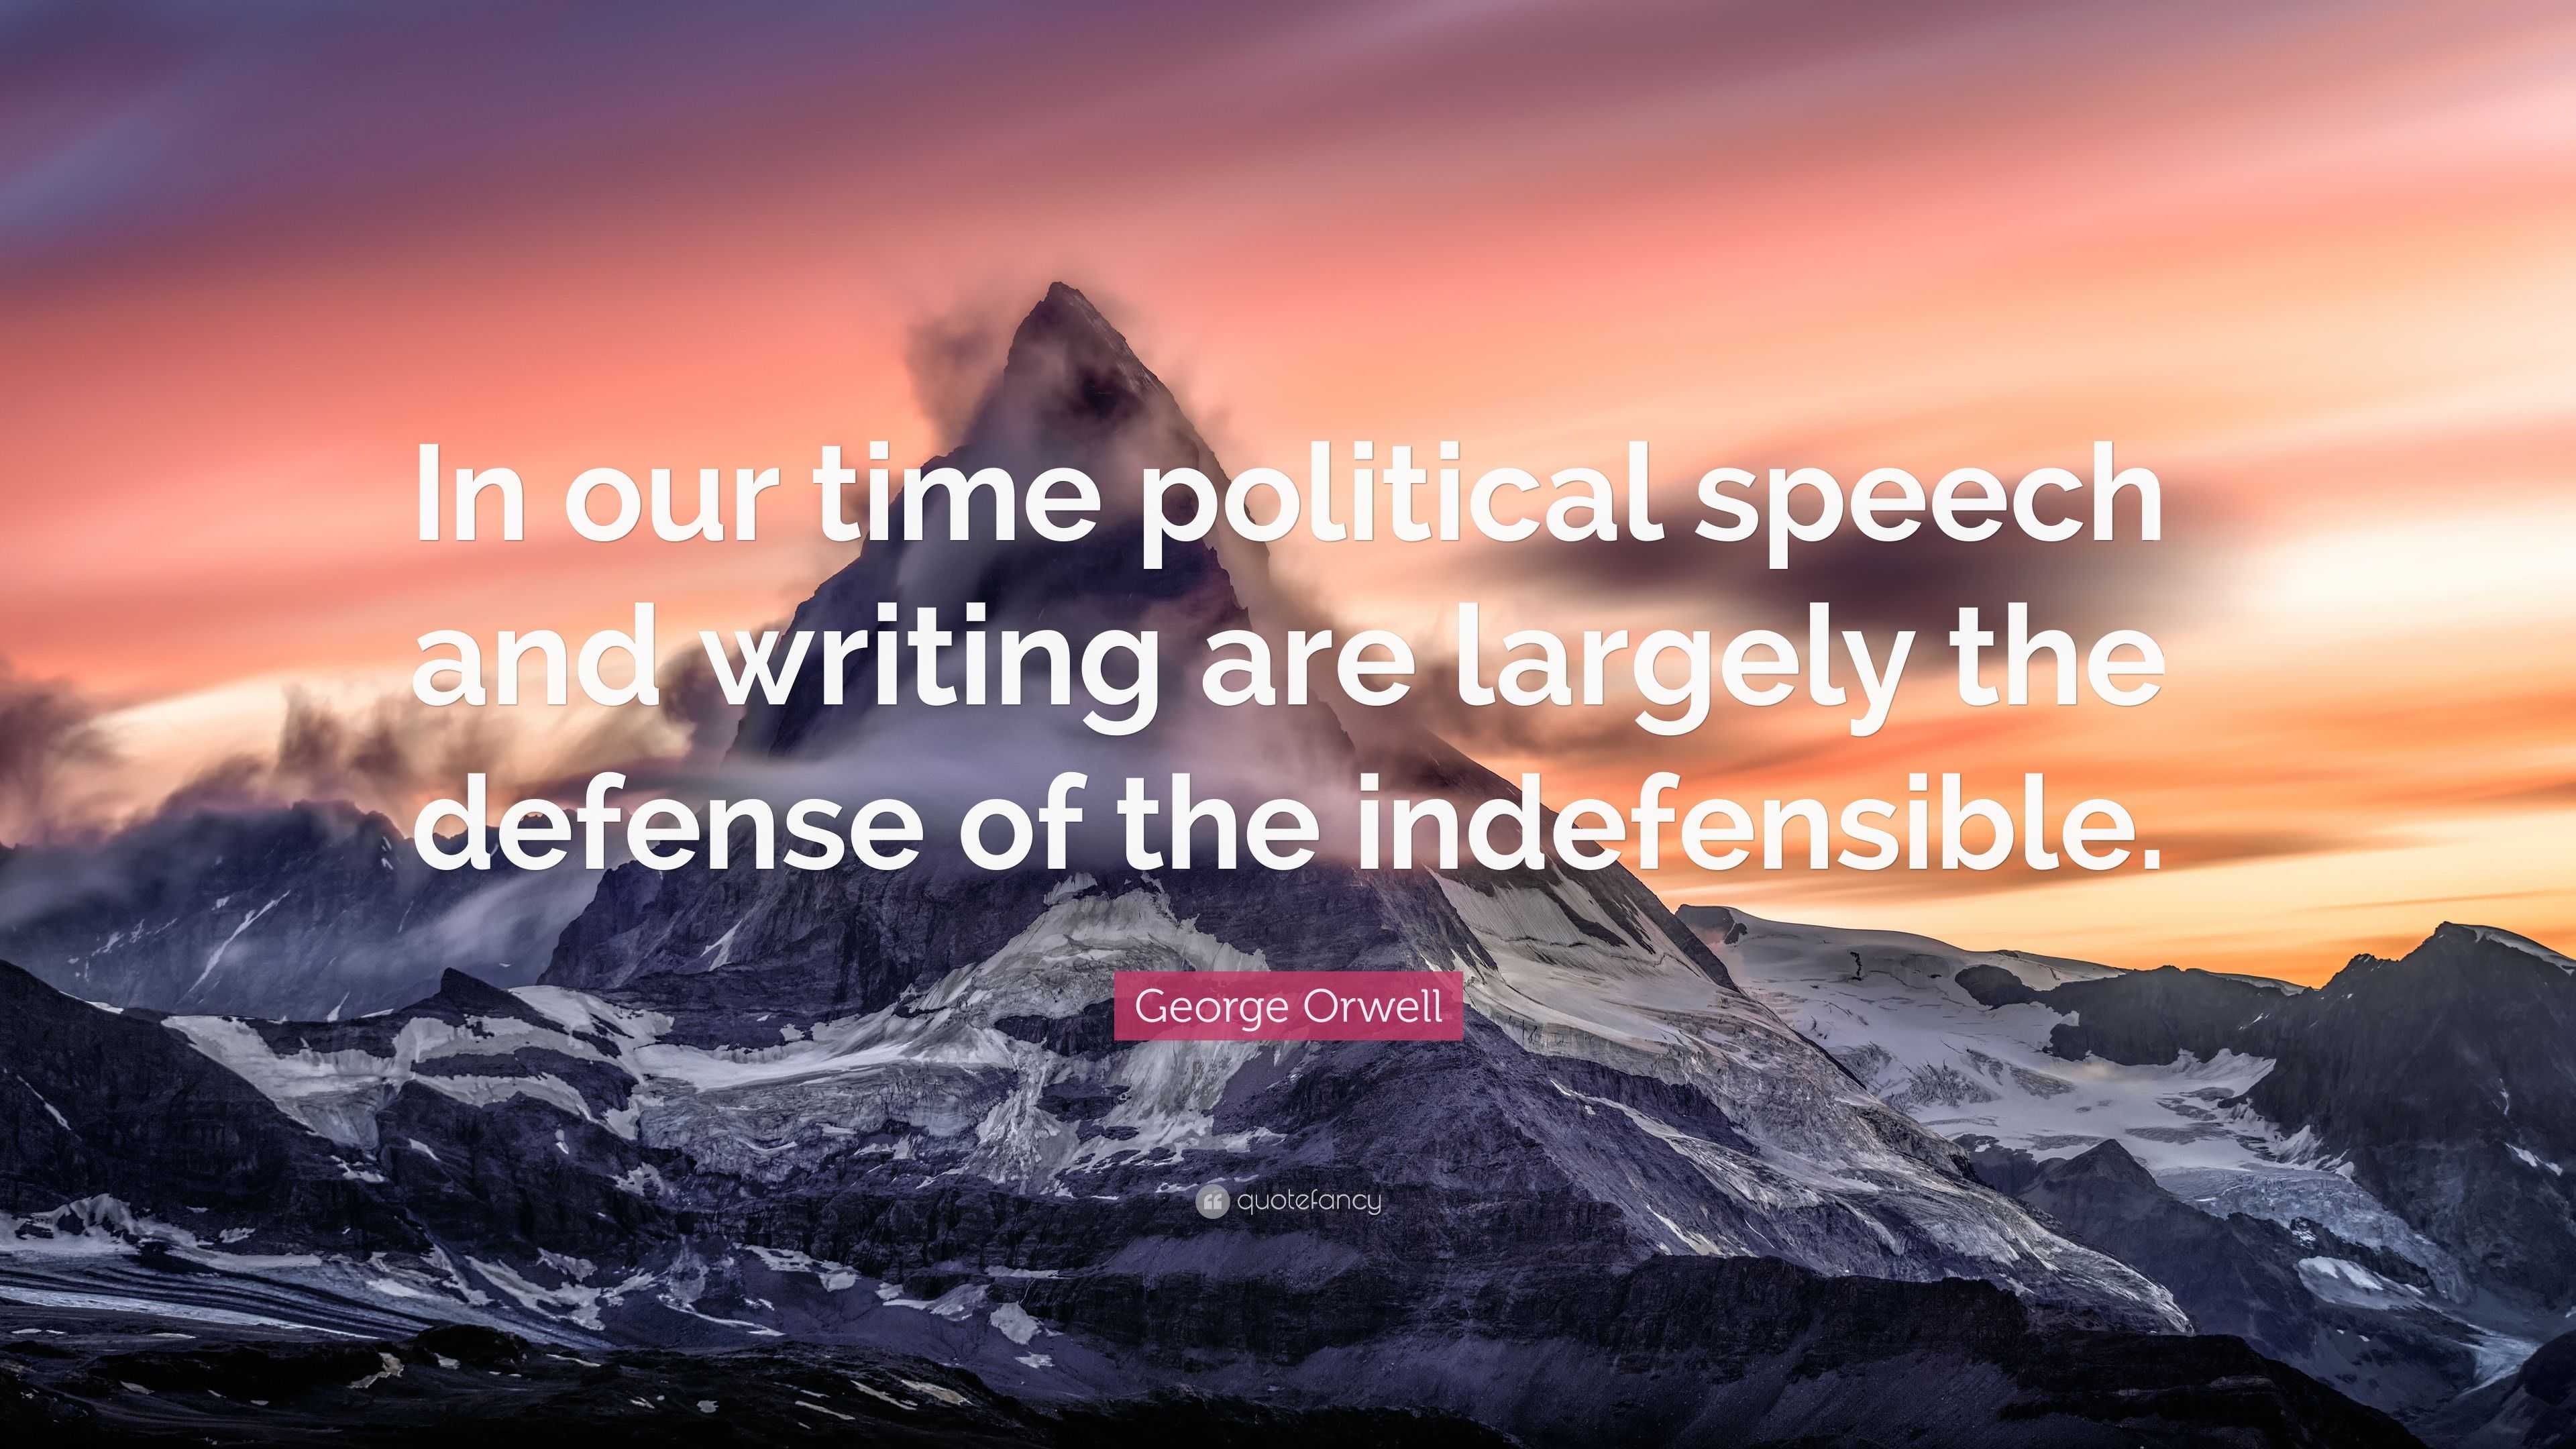 political speech and writing are largely the defense of the indefensible meaning